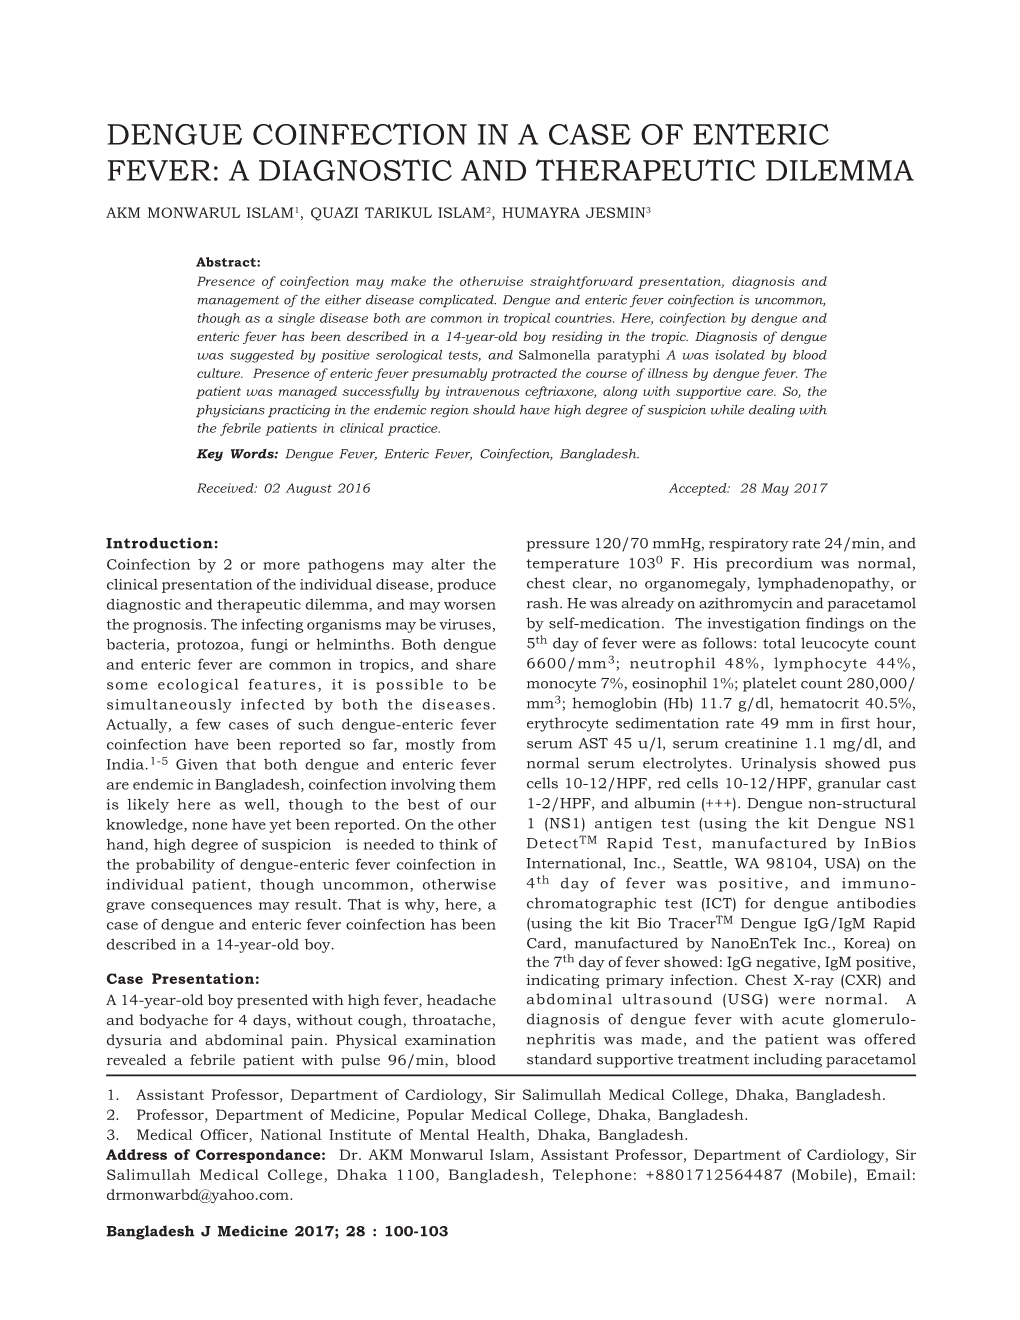 Dengue Coinfection in a Case of Enteric Fever: a Diagnostic and Therapeutic Dilemma